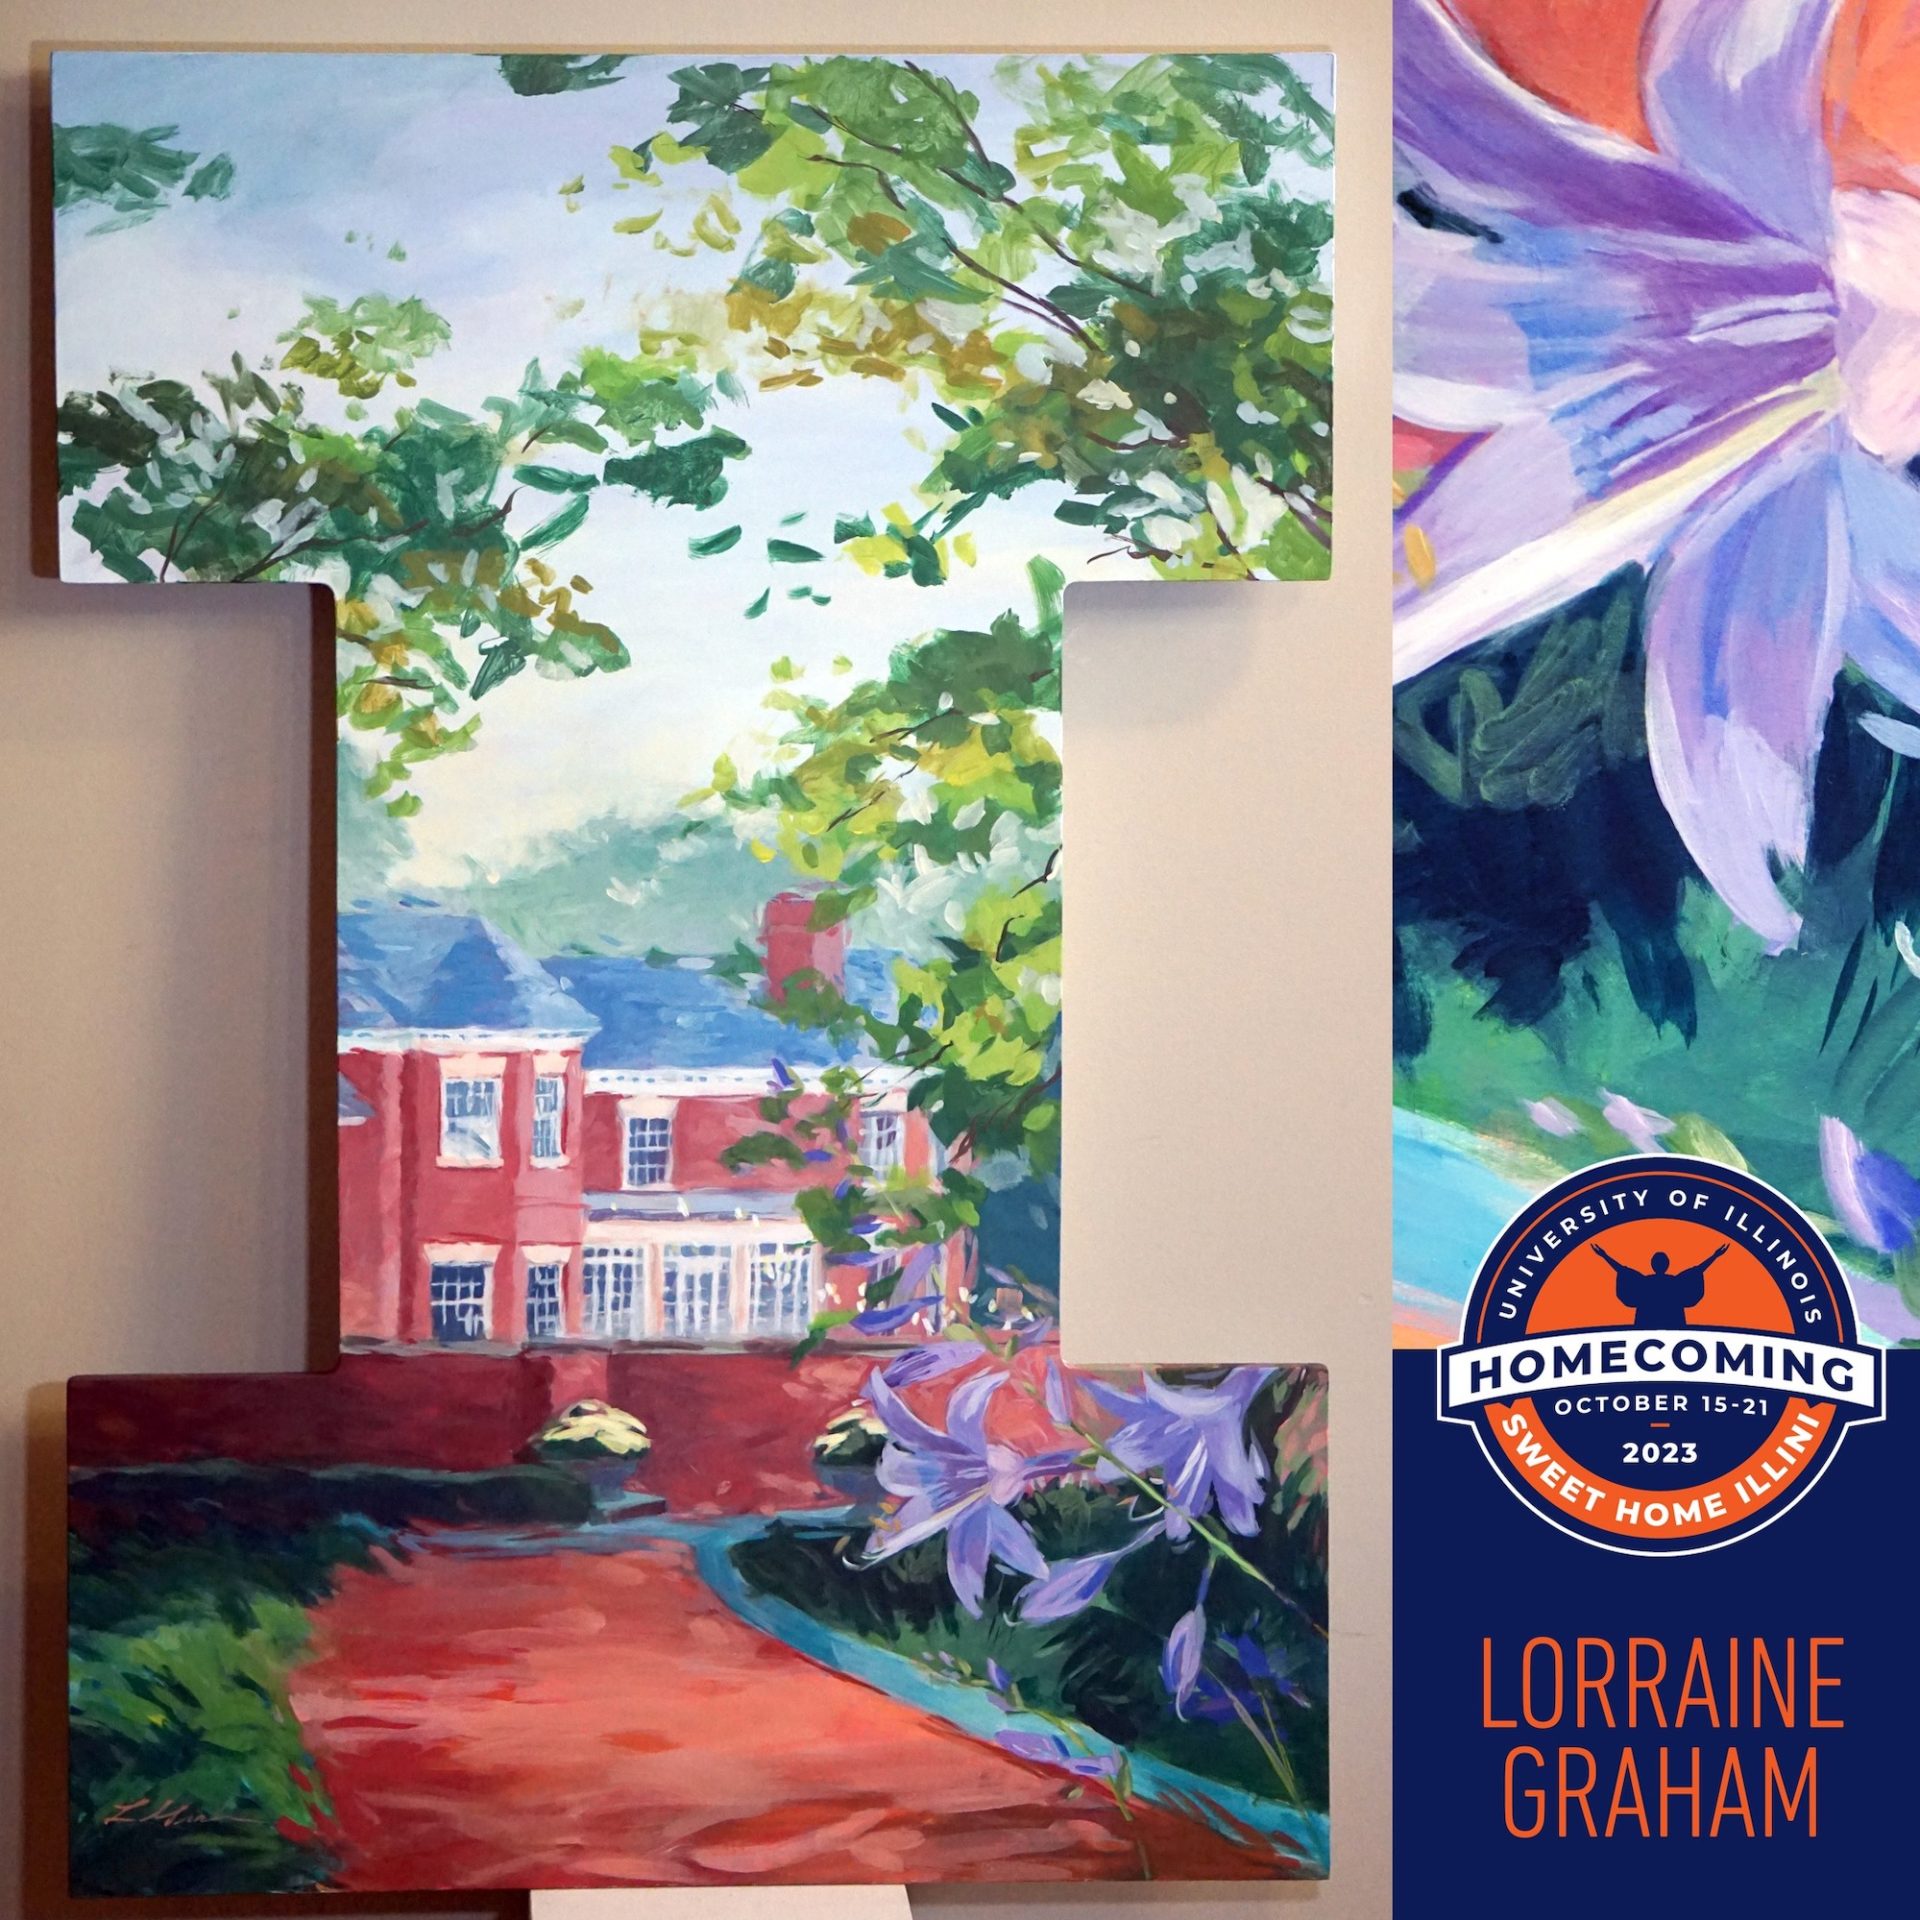 Check out this new art for U of I’s homecoming